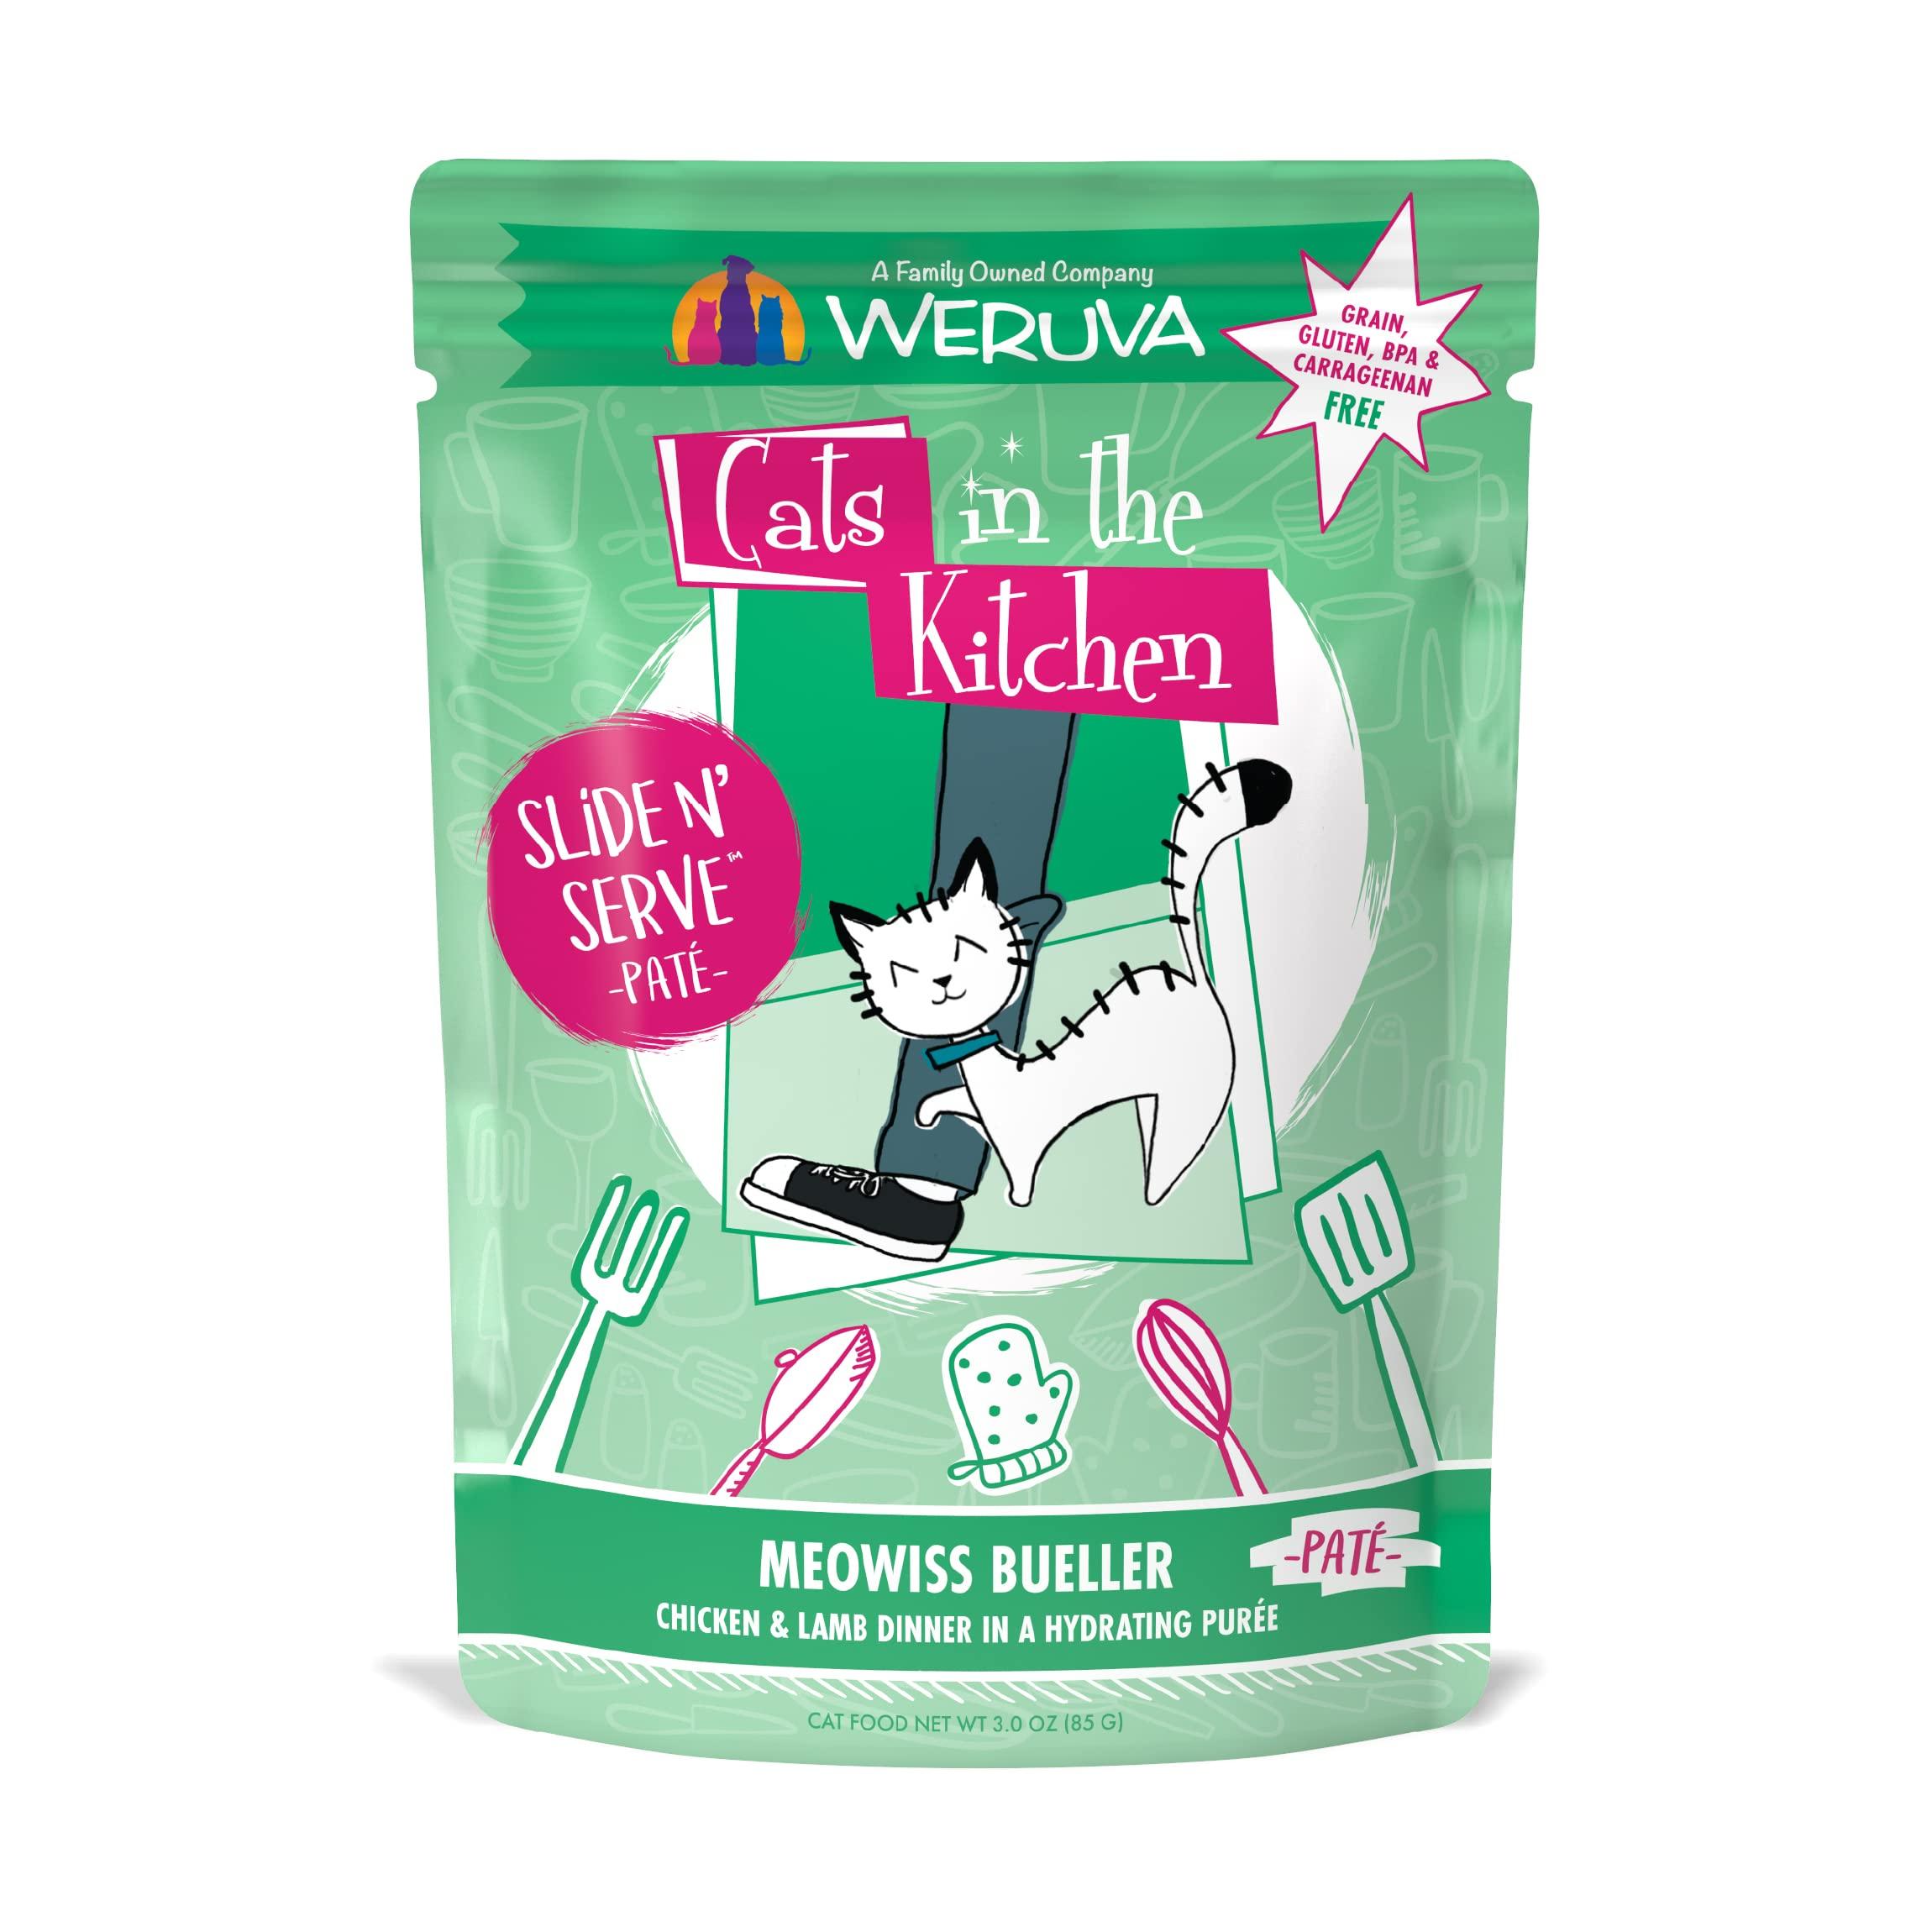 Weruva Cats in the Kitchen Slide N' Serve Grain-Free Natural Wet Pate Cat Food Pouches, Meowiss Bueller, 3oz Pouch (Pack of 12)